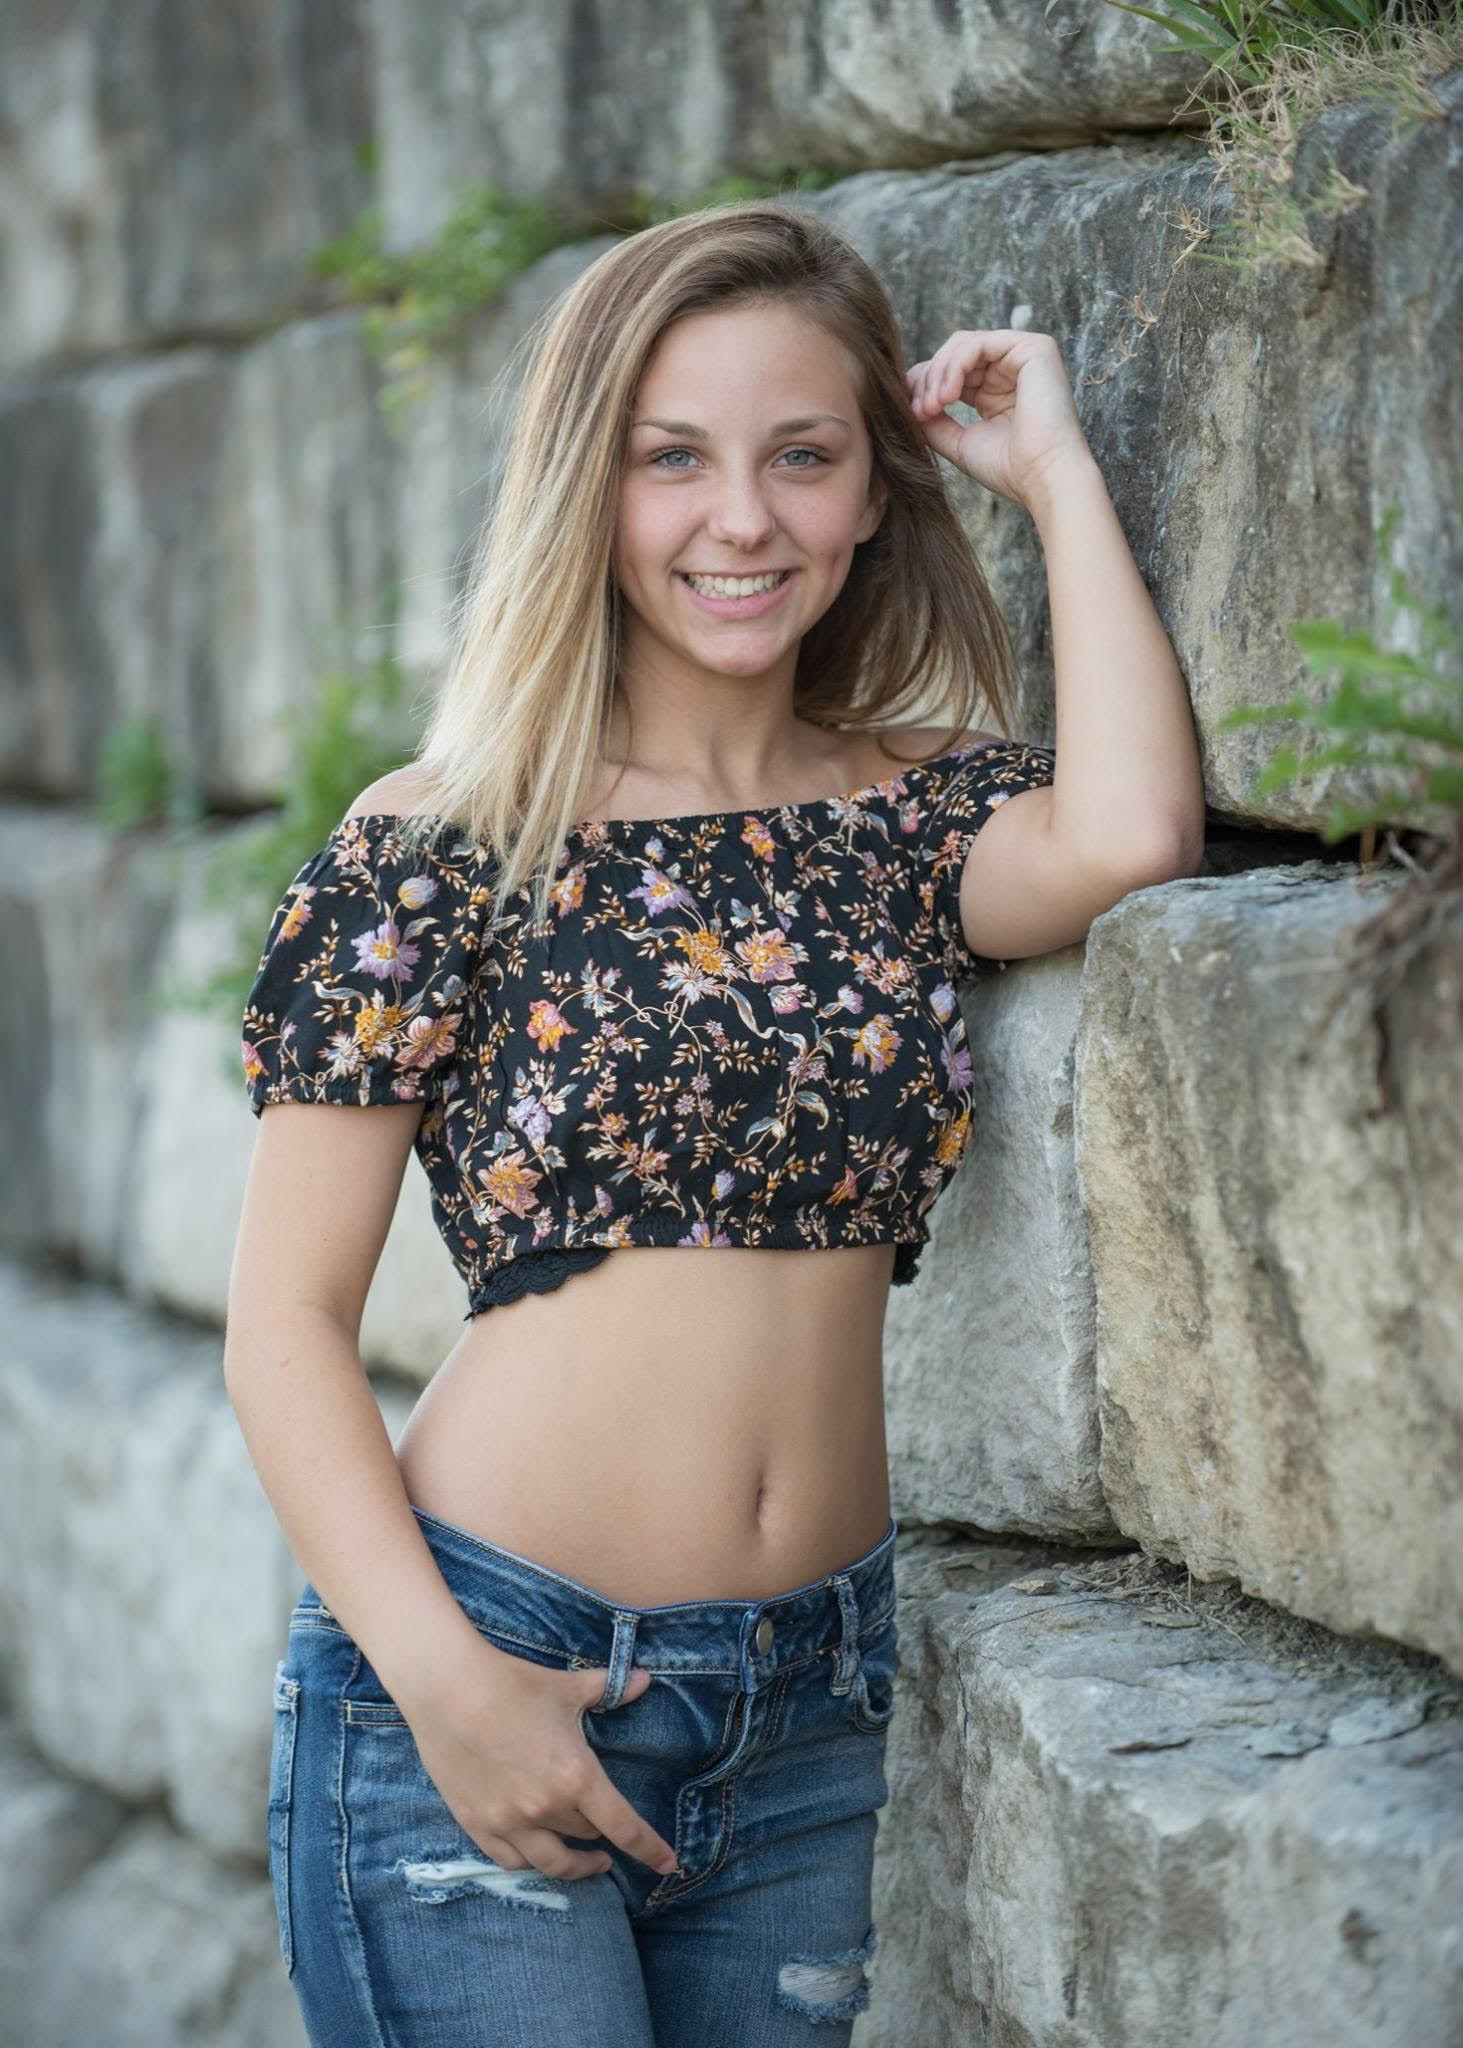 Clothed Teen